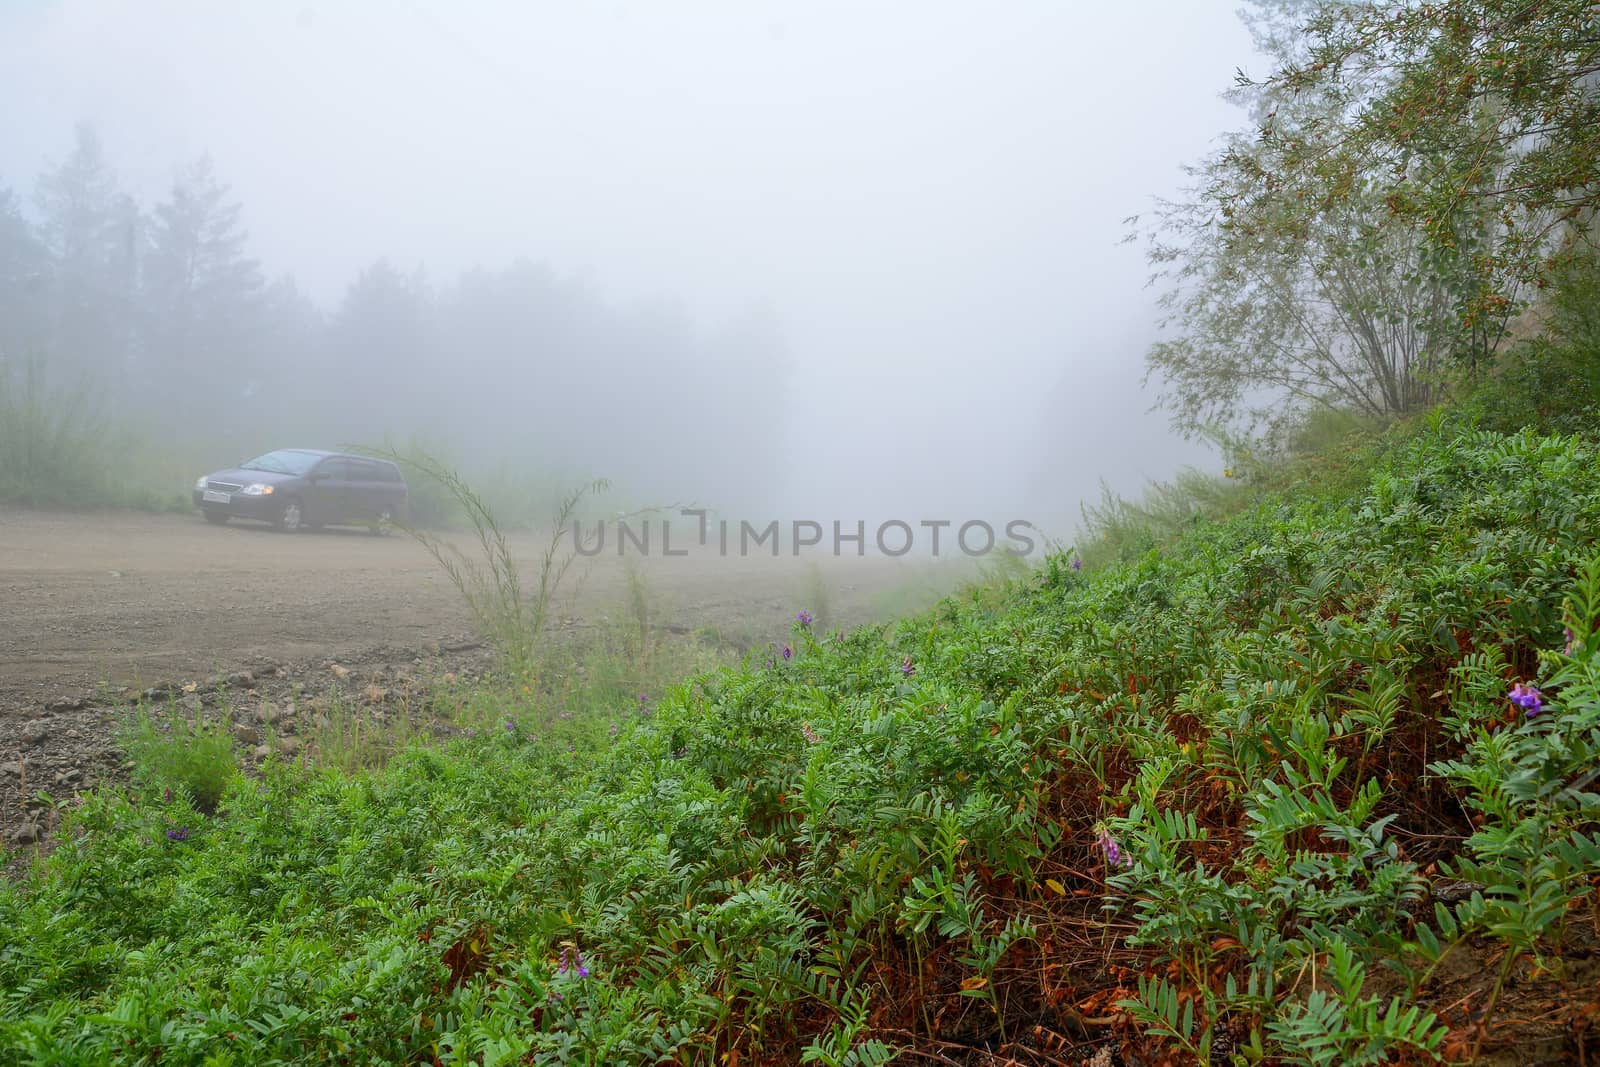 Empty rural road with car in the fog. Green grass in the foreground.